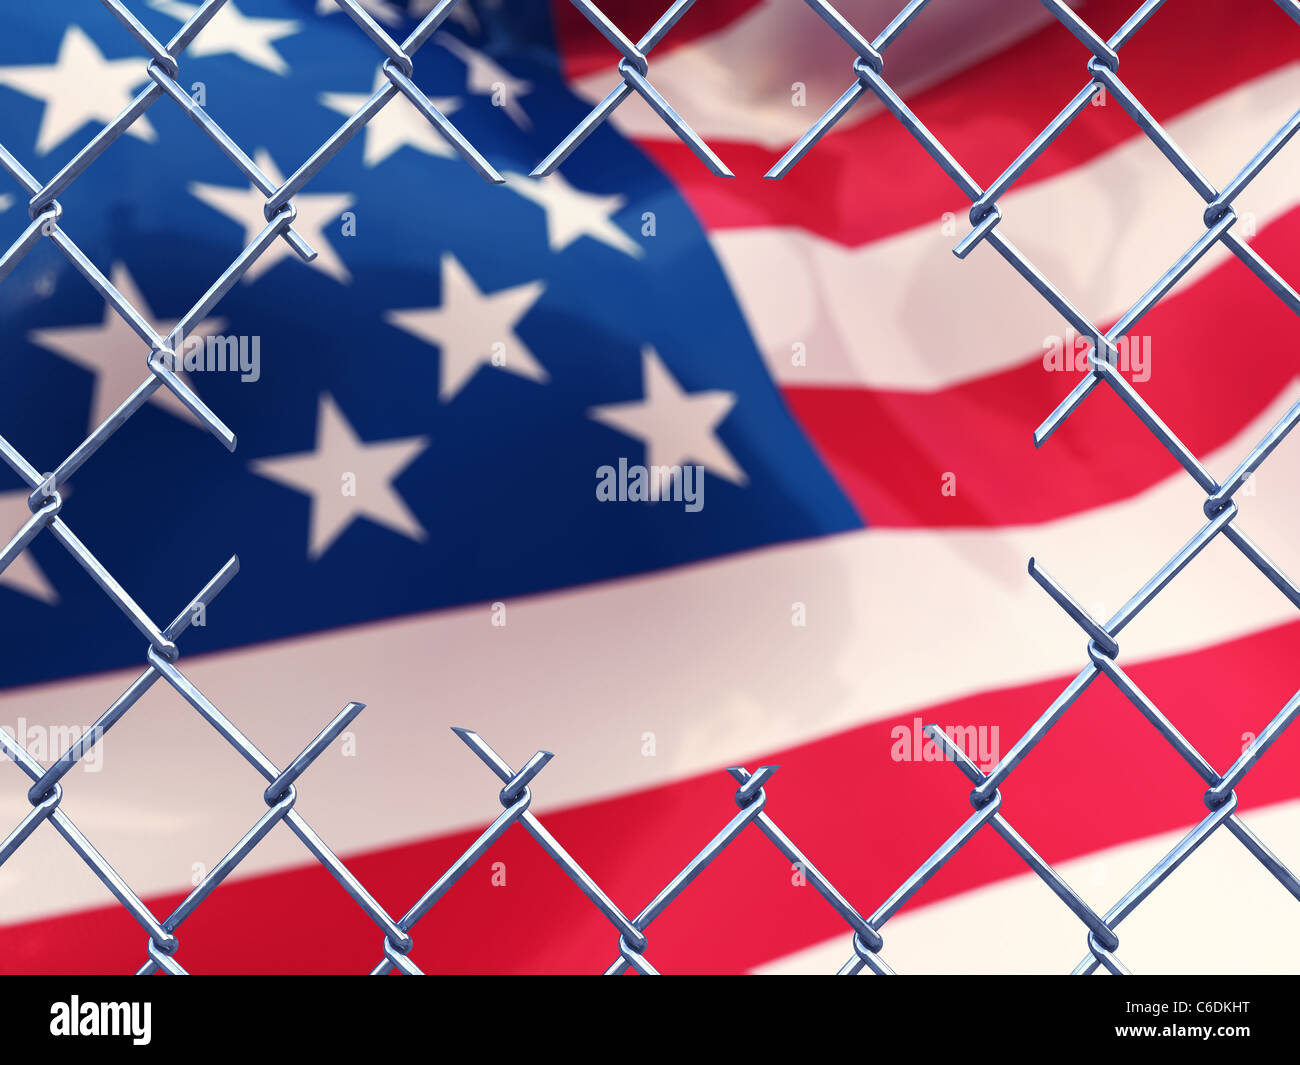 Illegal immigration concept , 3d illustration Stock Photo